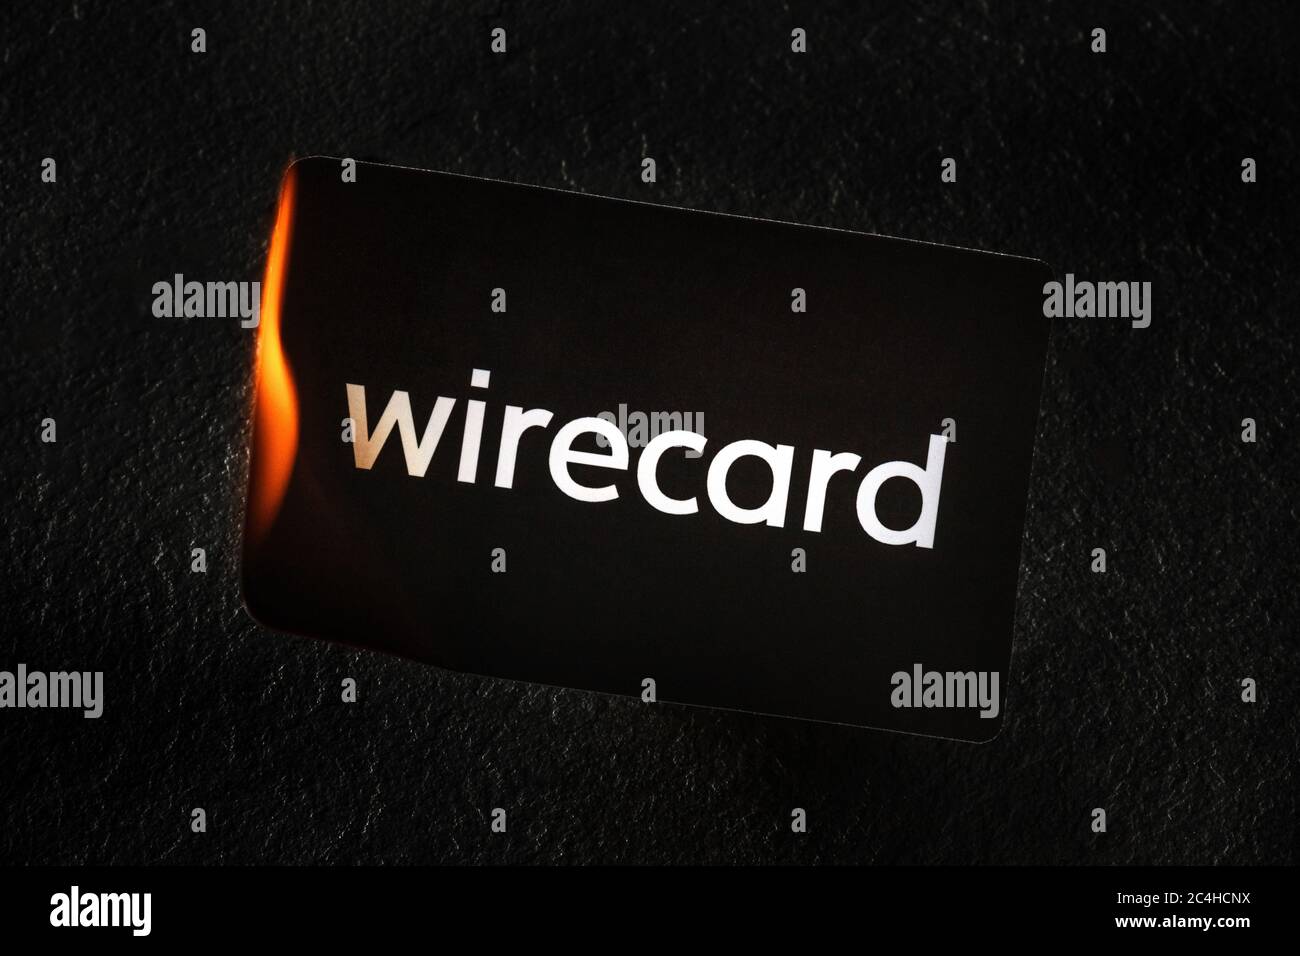 Madrid, Spain - June 27, 2020: Wirecard prepaid card burning on fire following the company bankruptcy and the freezing of cardholders' money Stock Photo